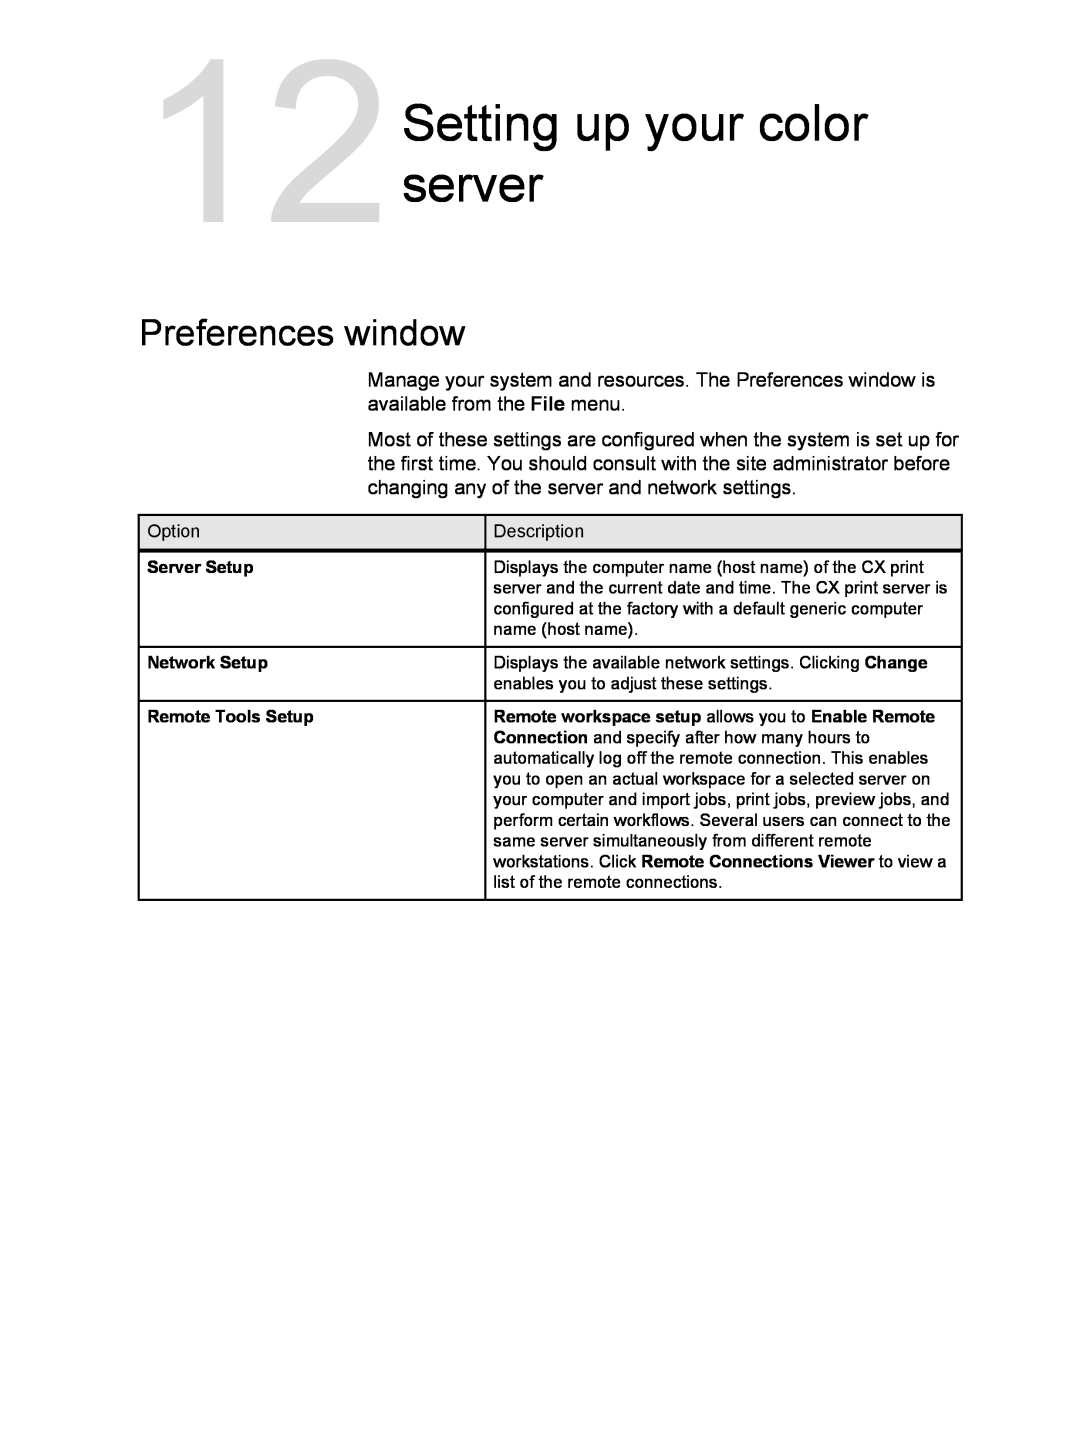 Xerox 550, 560 manual 12Setting up your color server, Preferences window 